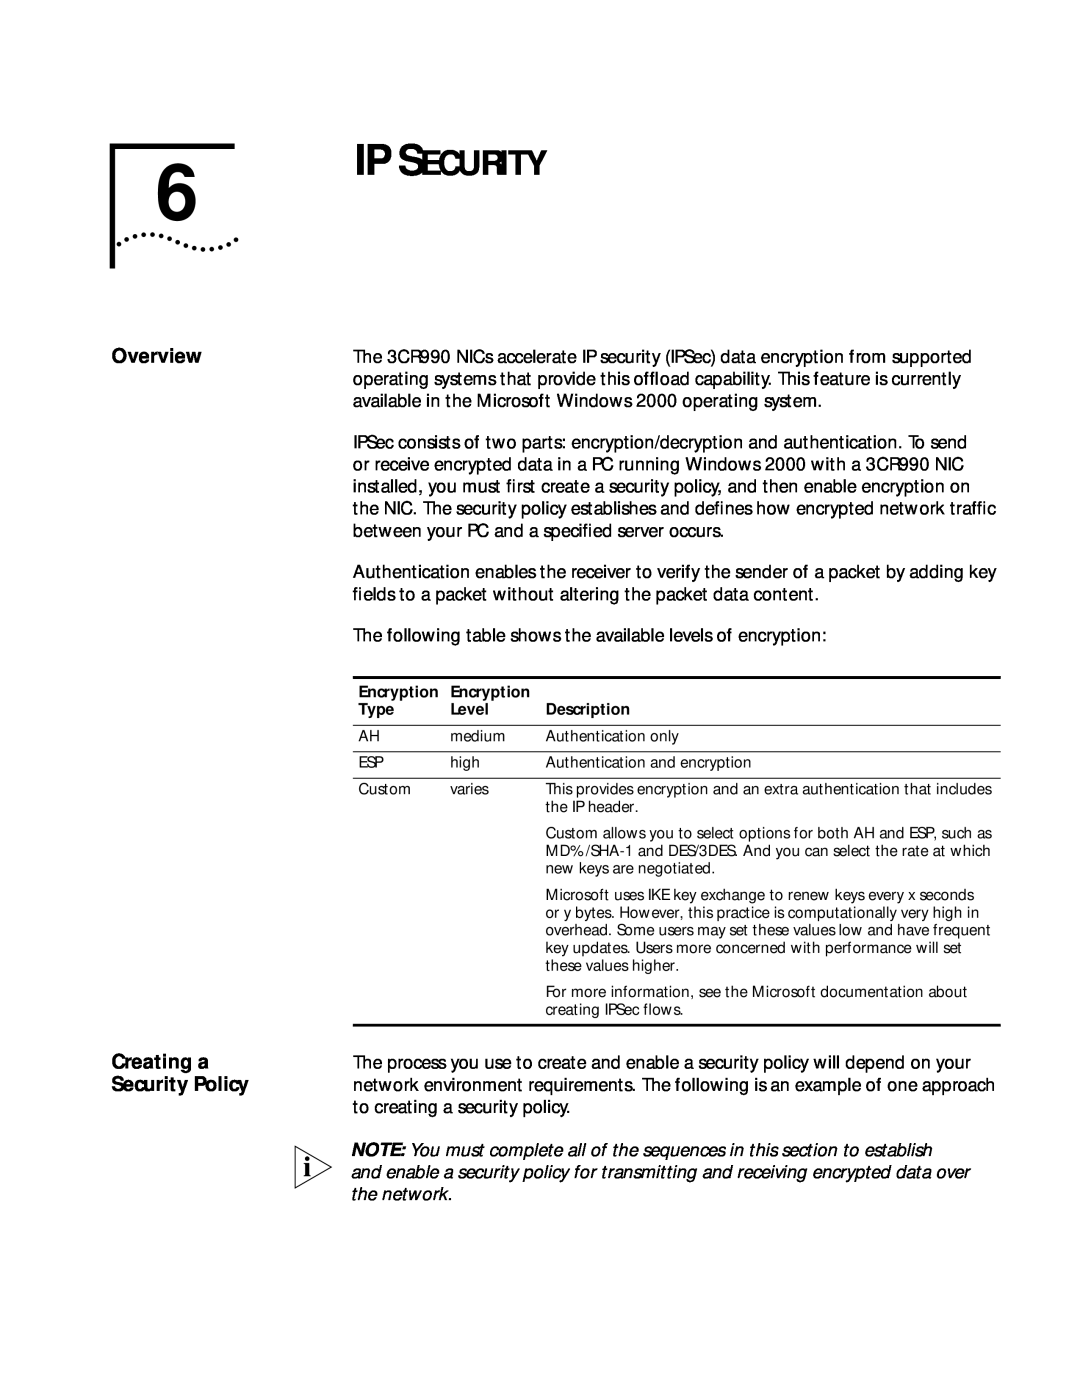 3Com 3CR990 manual Ip Security, Overview Creating a Security Policy 